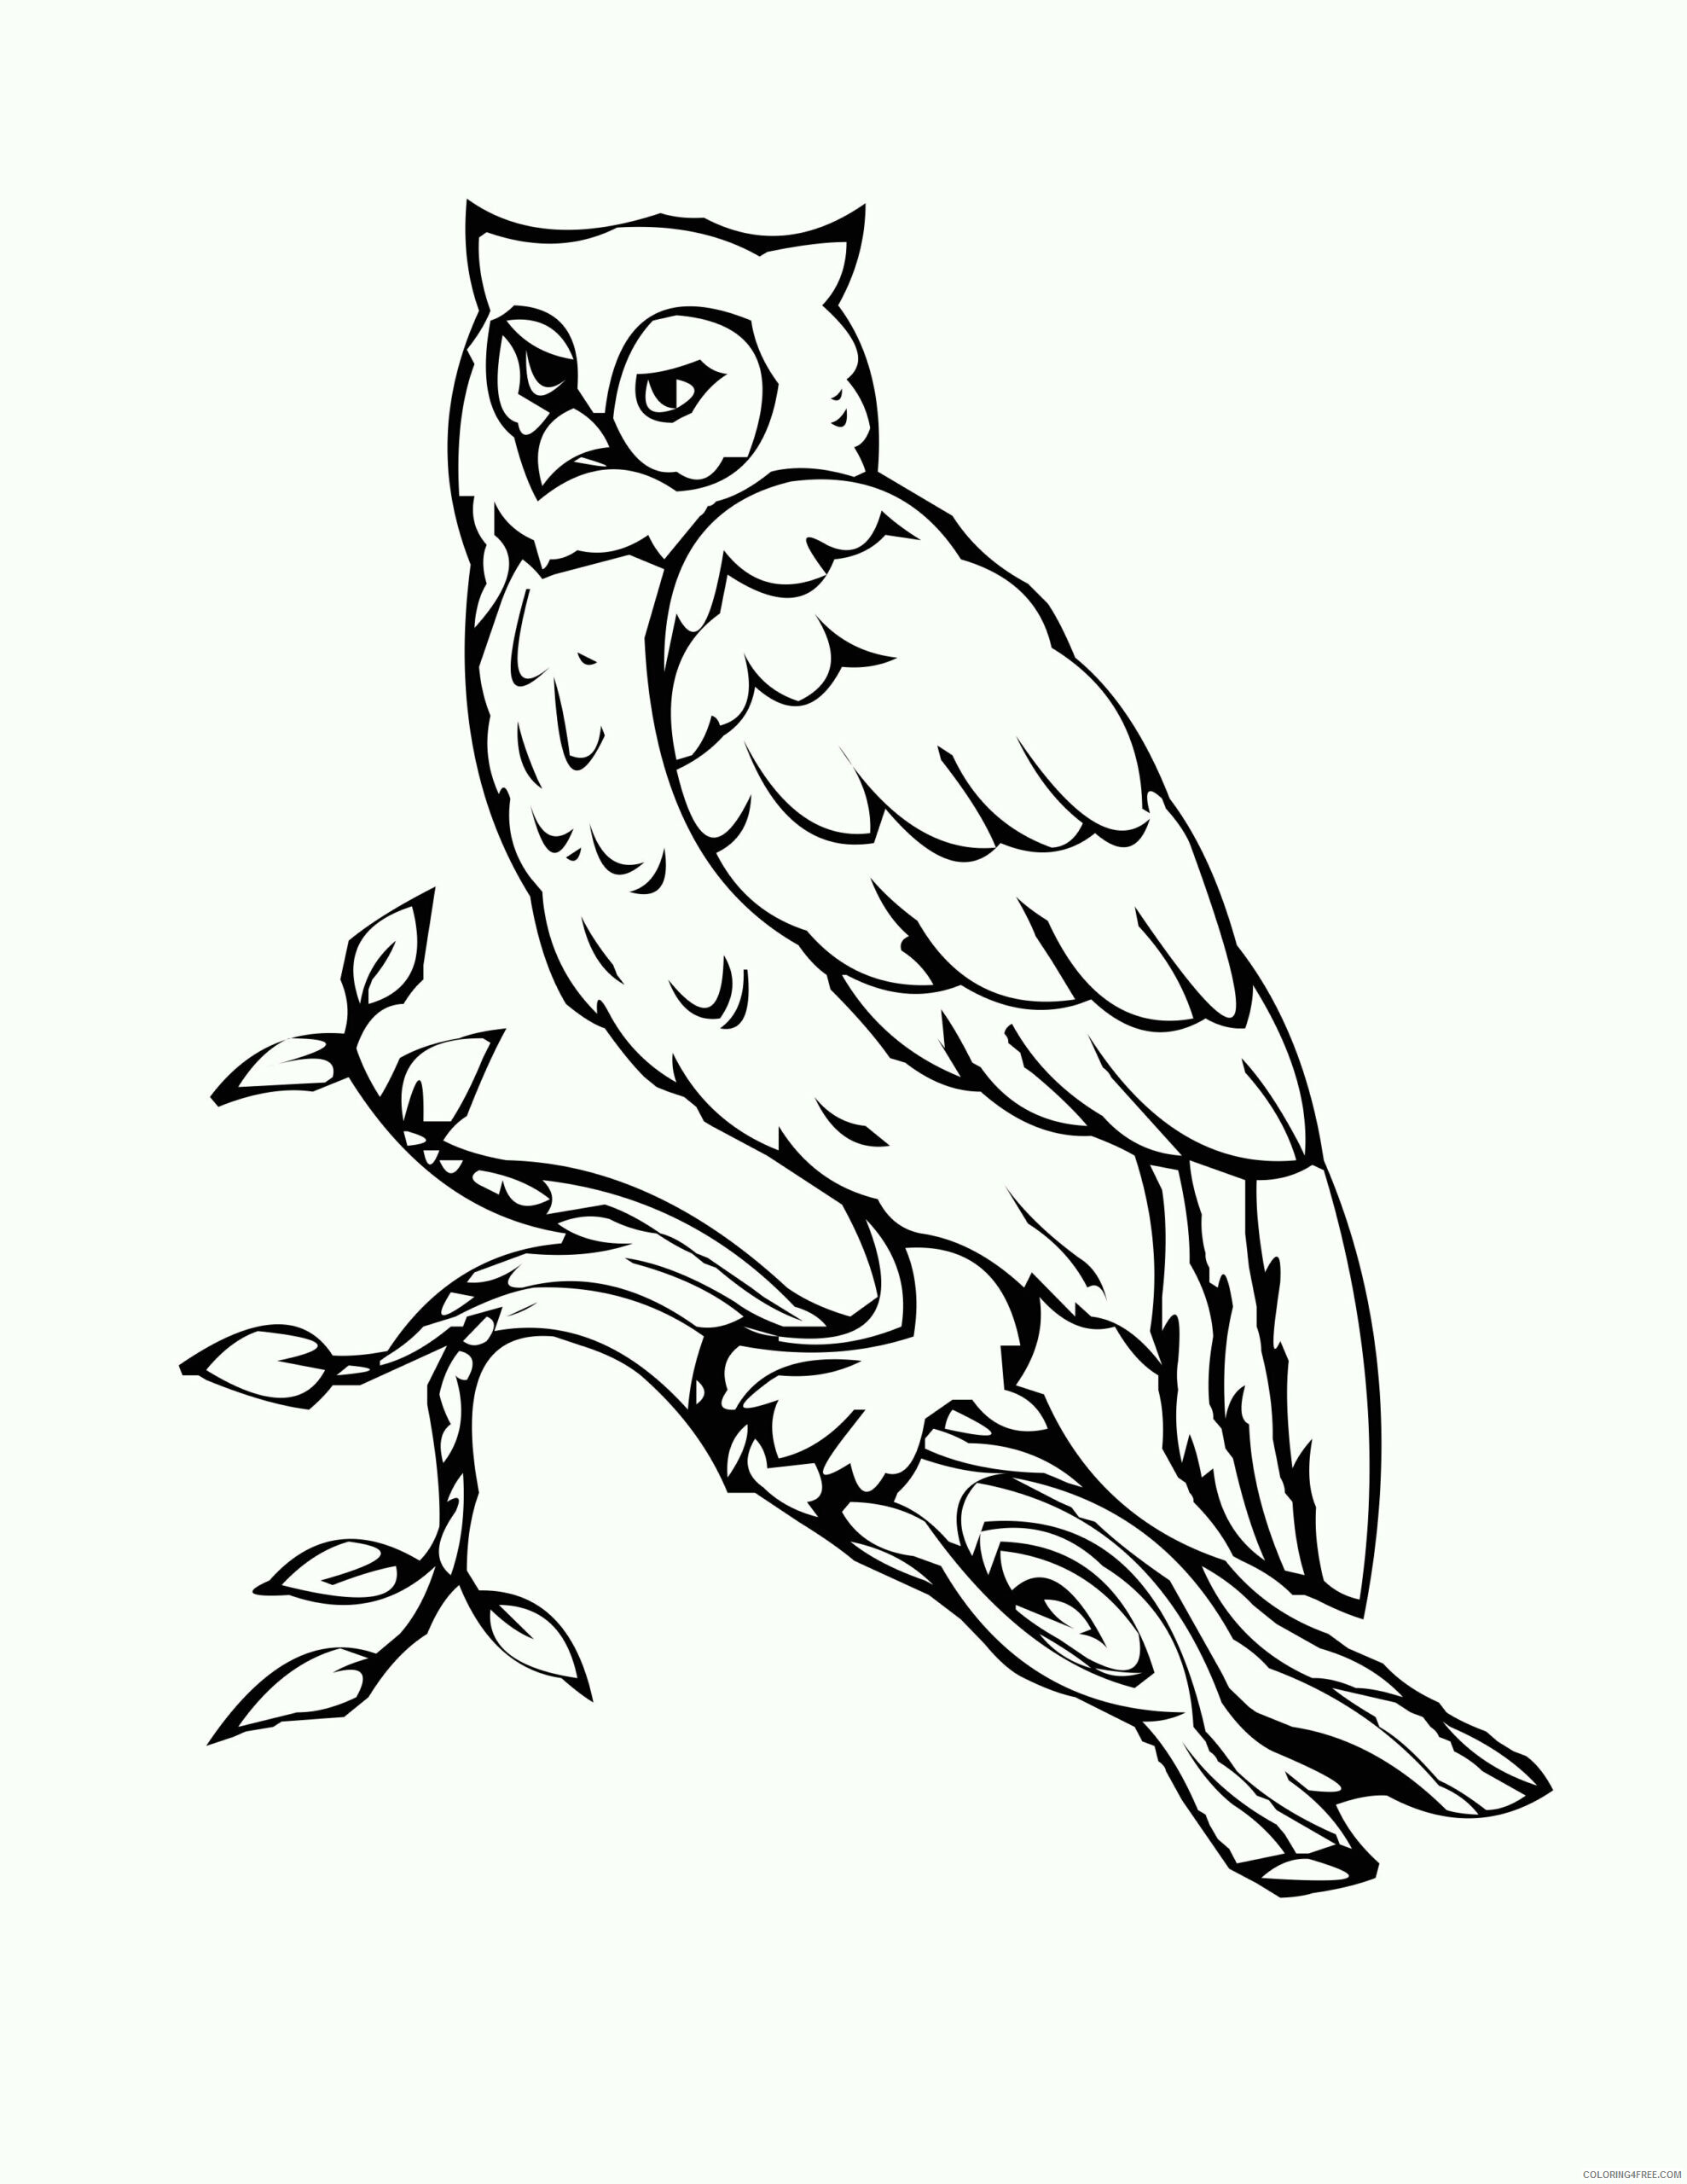 Owl Coloring Sheets Animal Coloring Pages Printable 2021 3019 Coloring4free